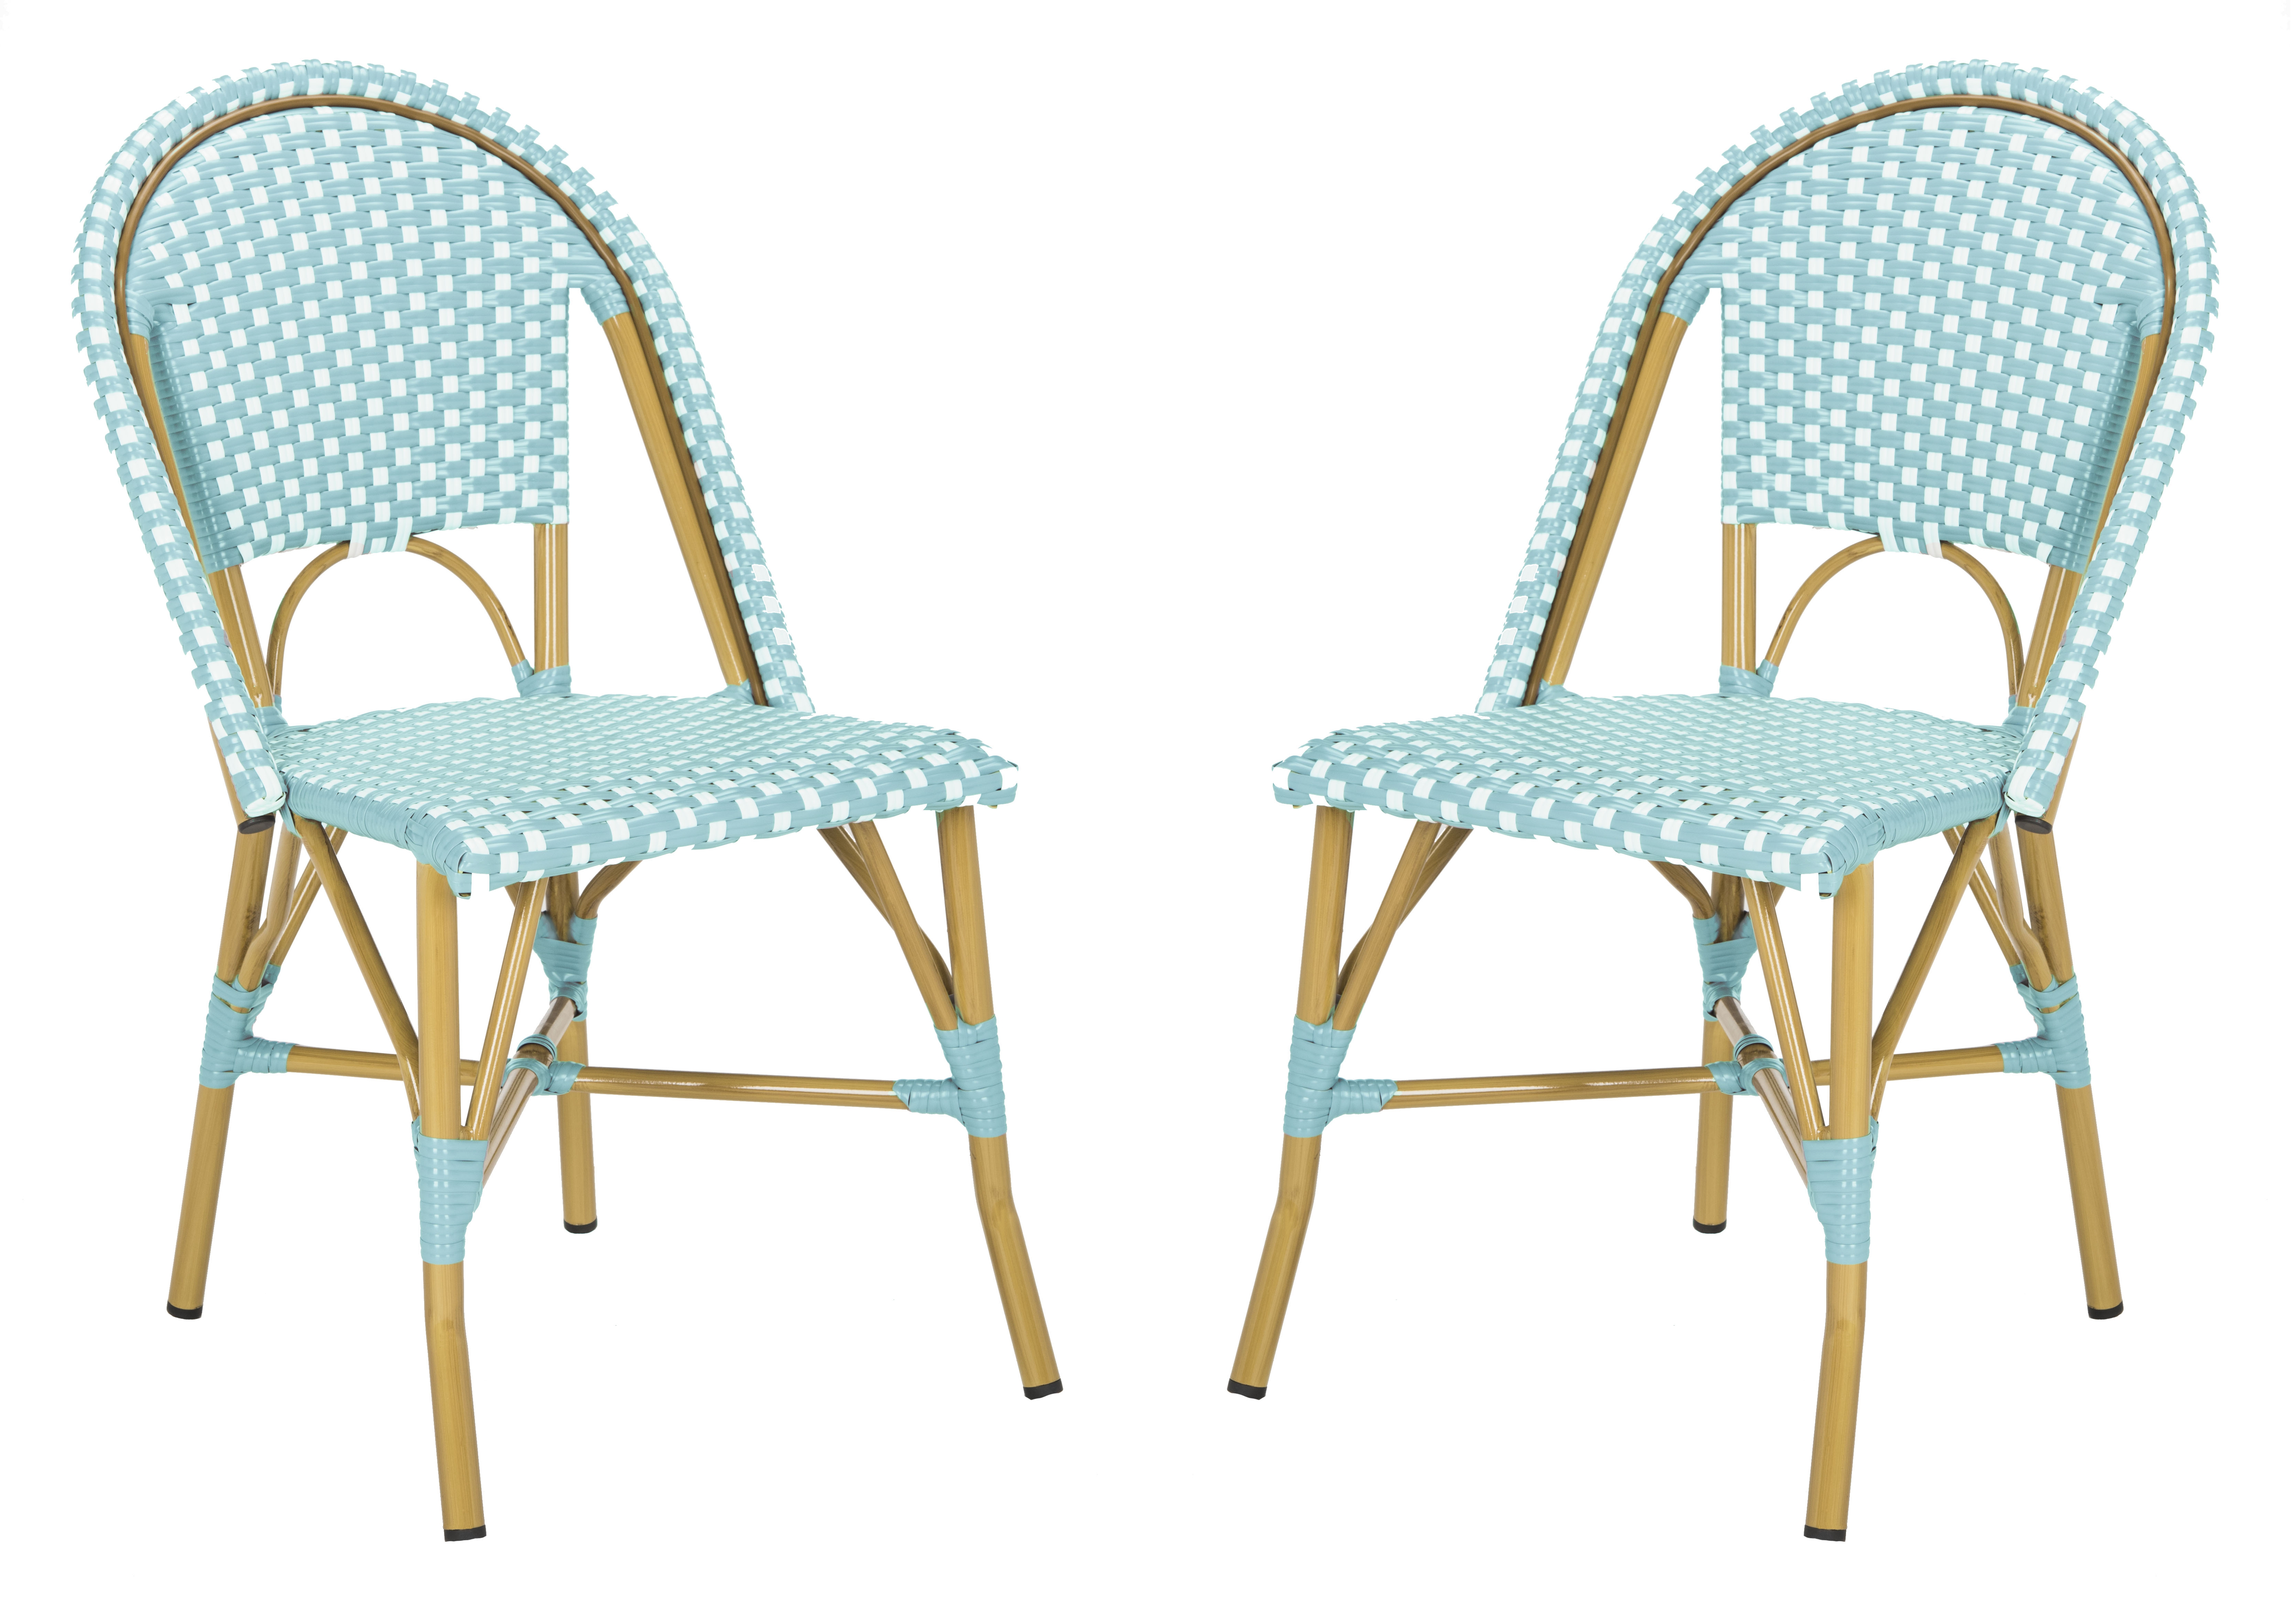 Salcha Indoor-Outdoor French Bistro Stacking Side Chair - Teal/White/Light Brown - Safavieh - Arlo Home